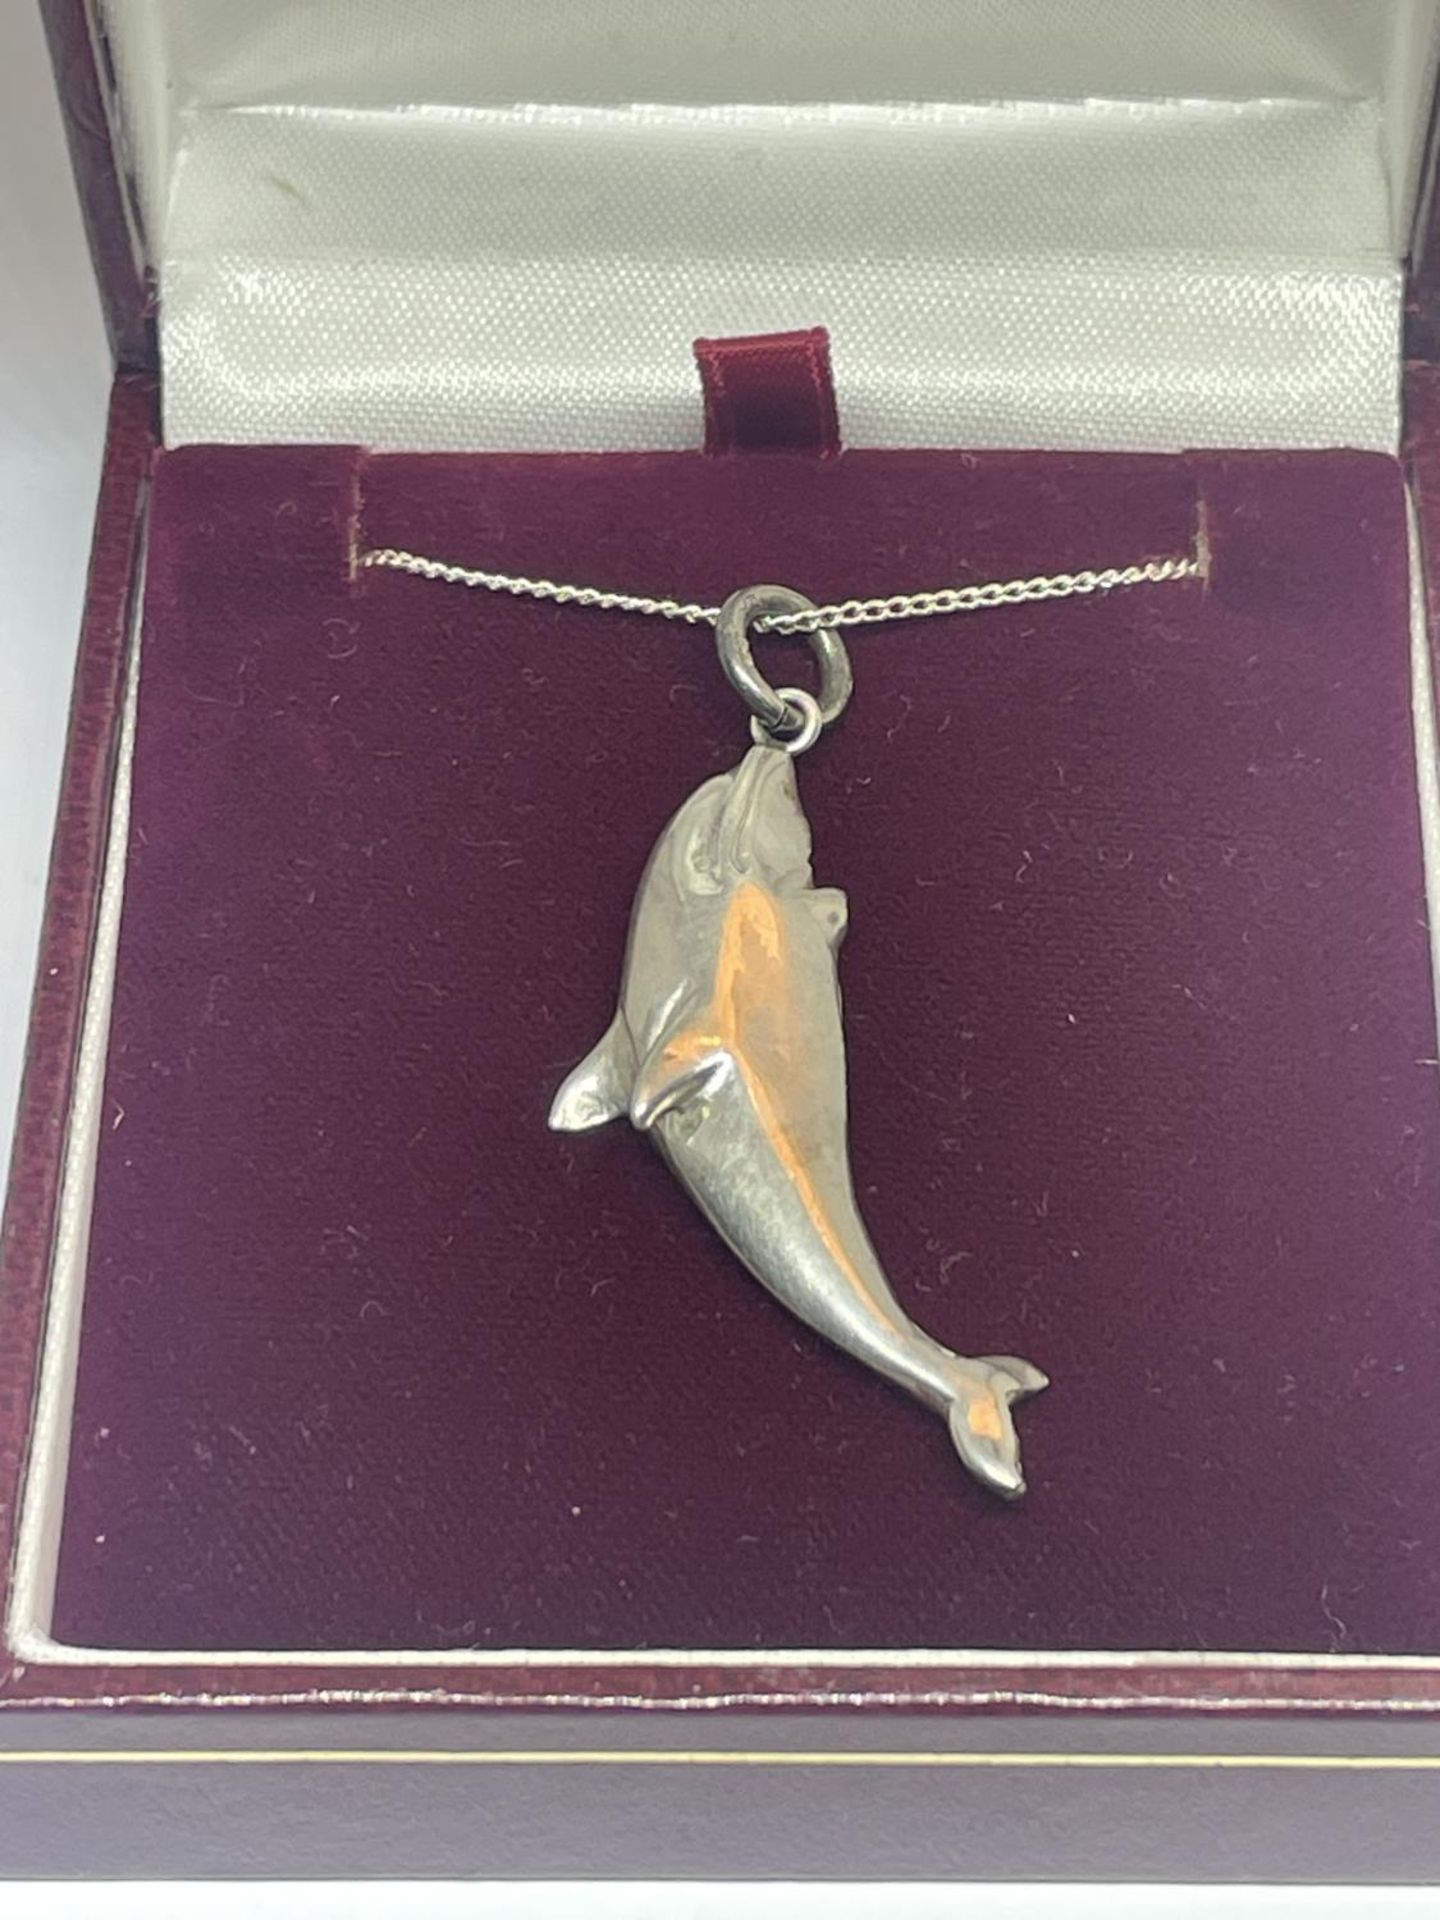 A SILVER NECKLACE WITH DOLPHIN PENDANT IN A PRESENTATION BOX